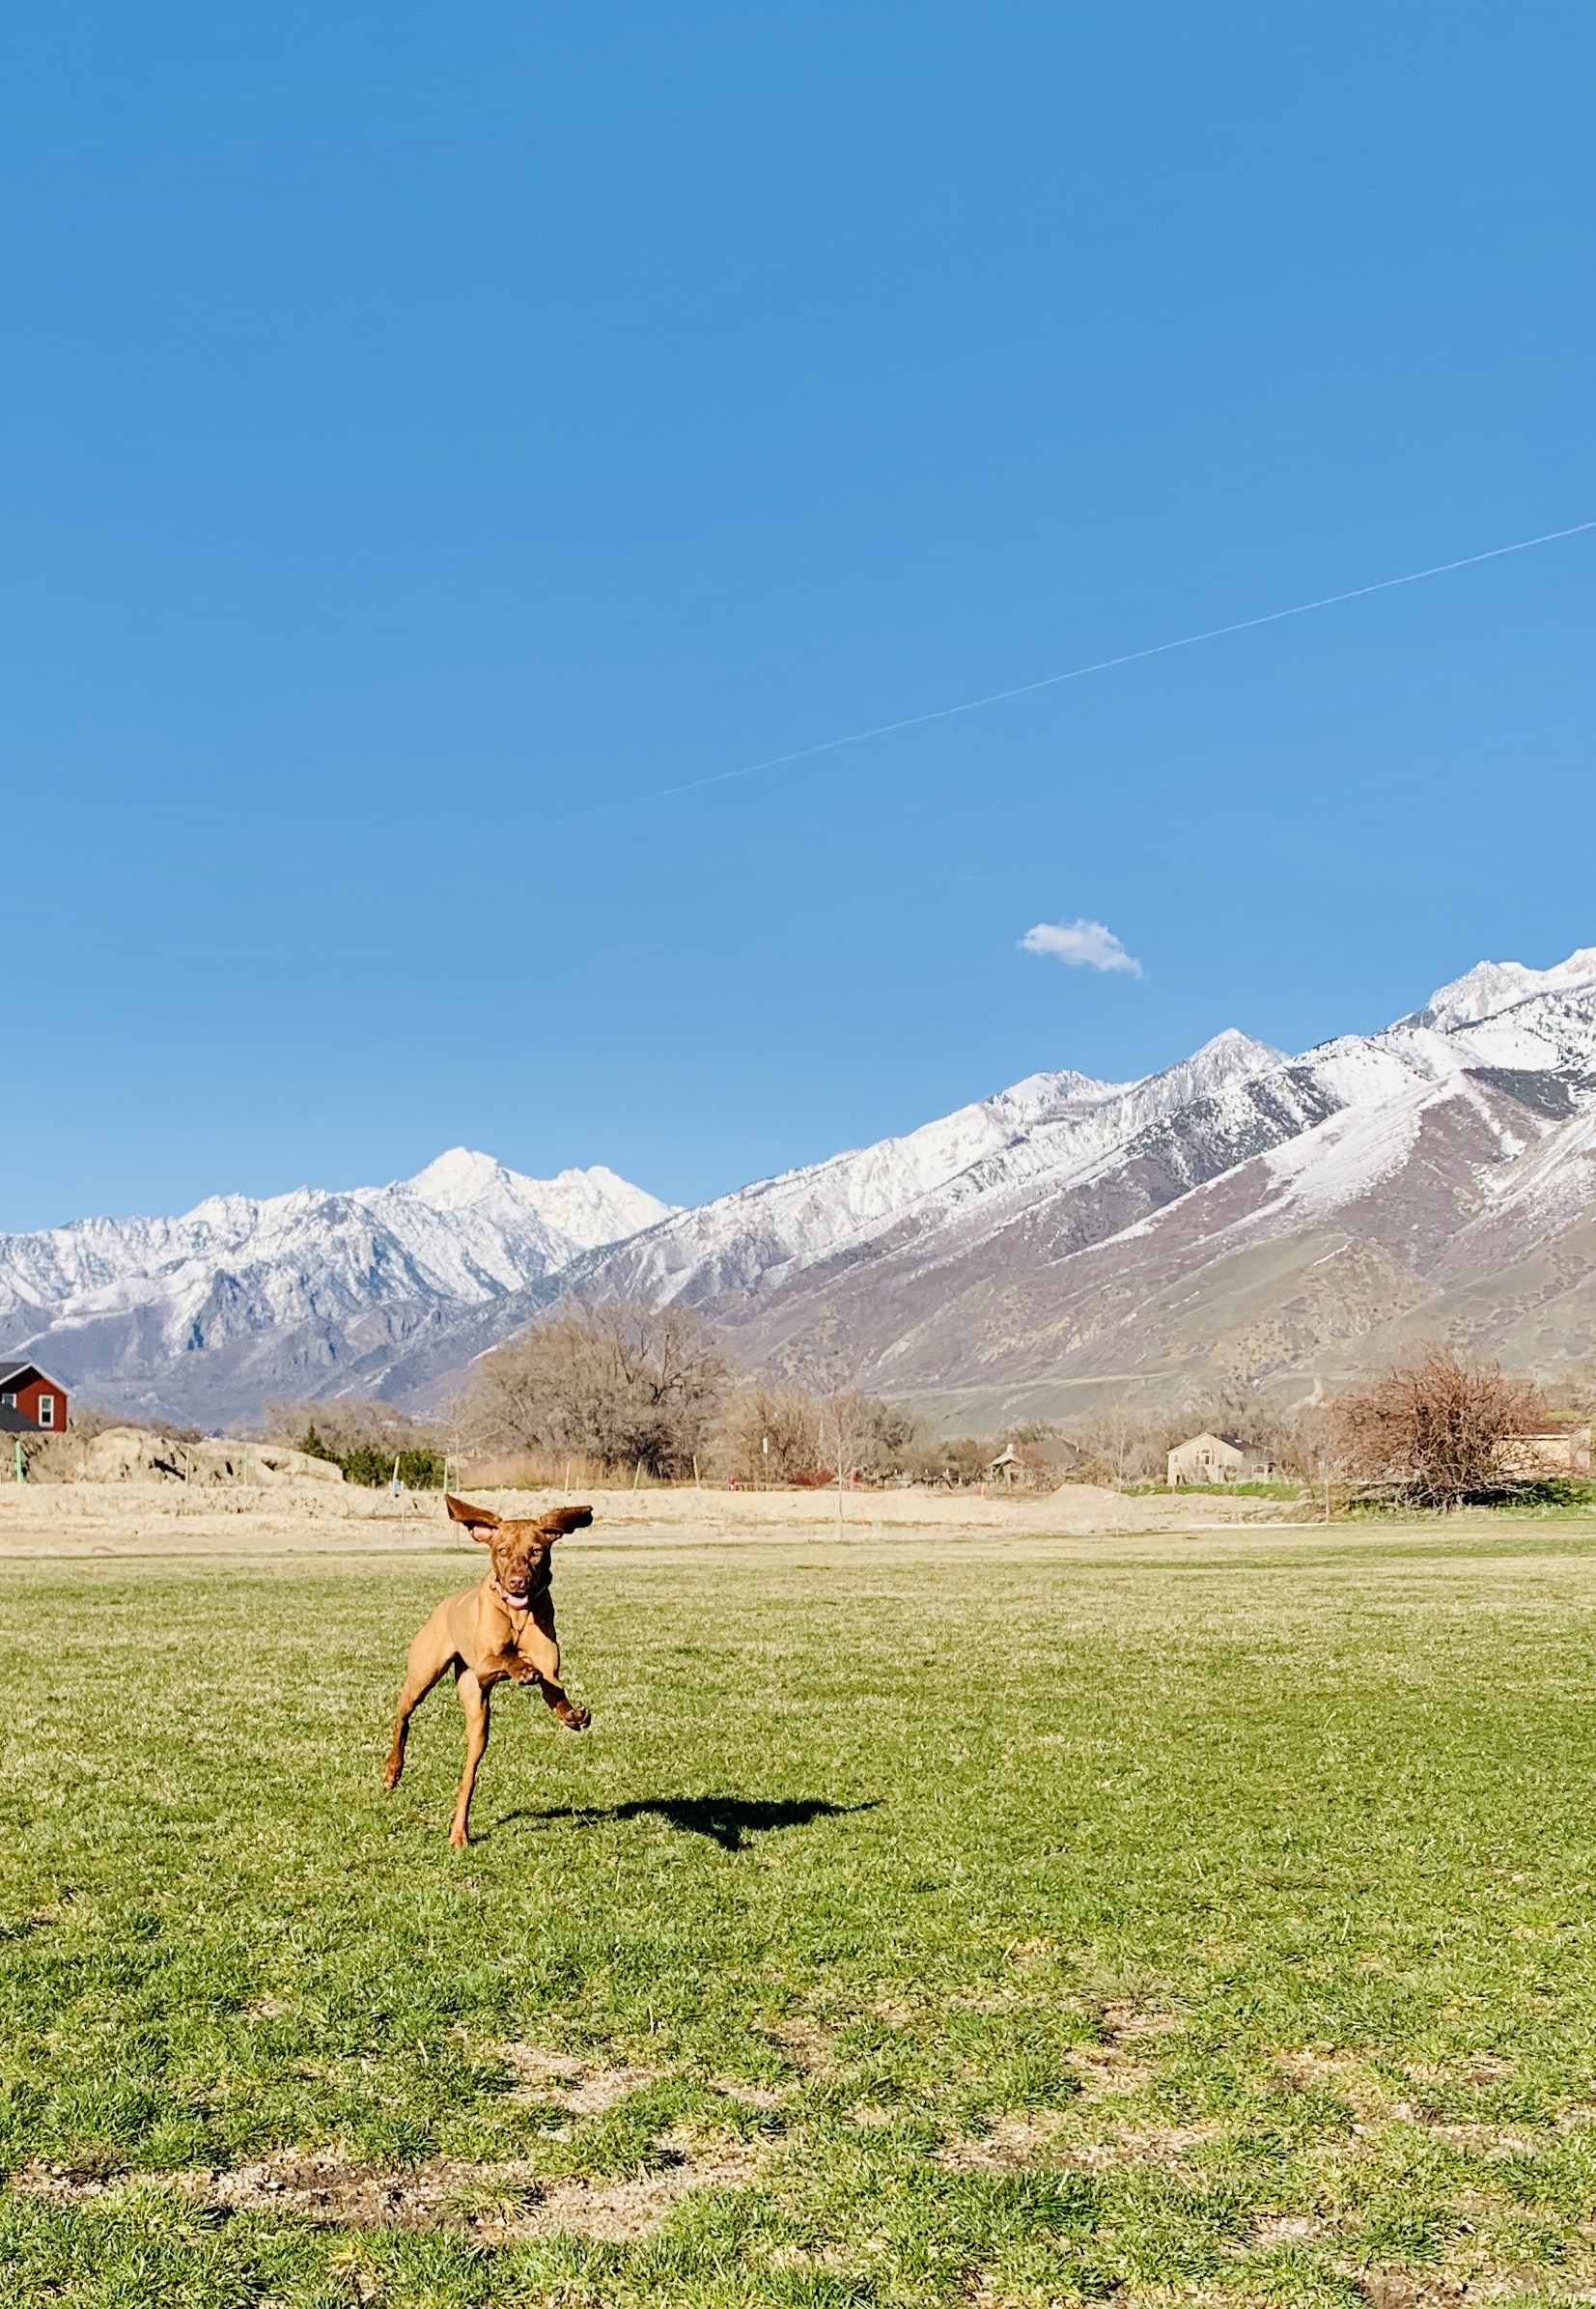 A vizsla running in park with mountains in the background.